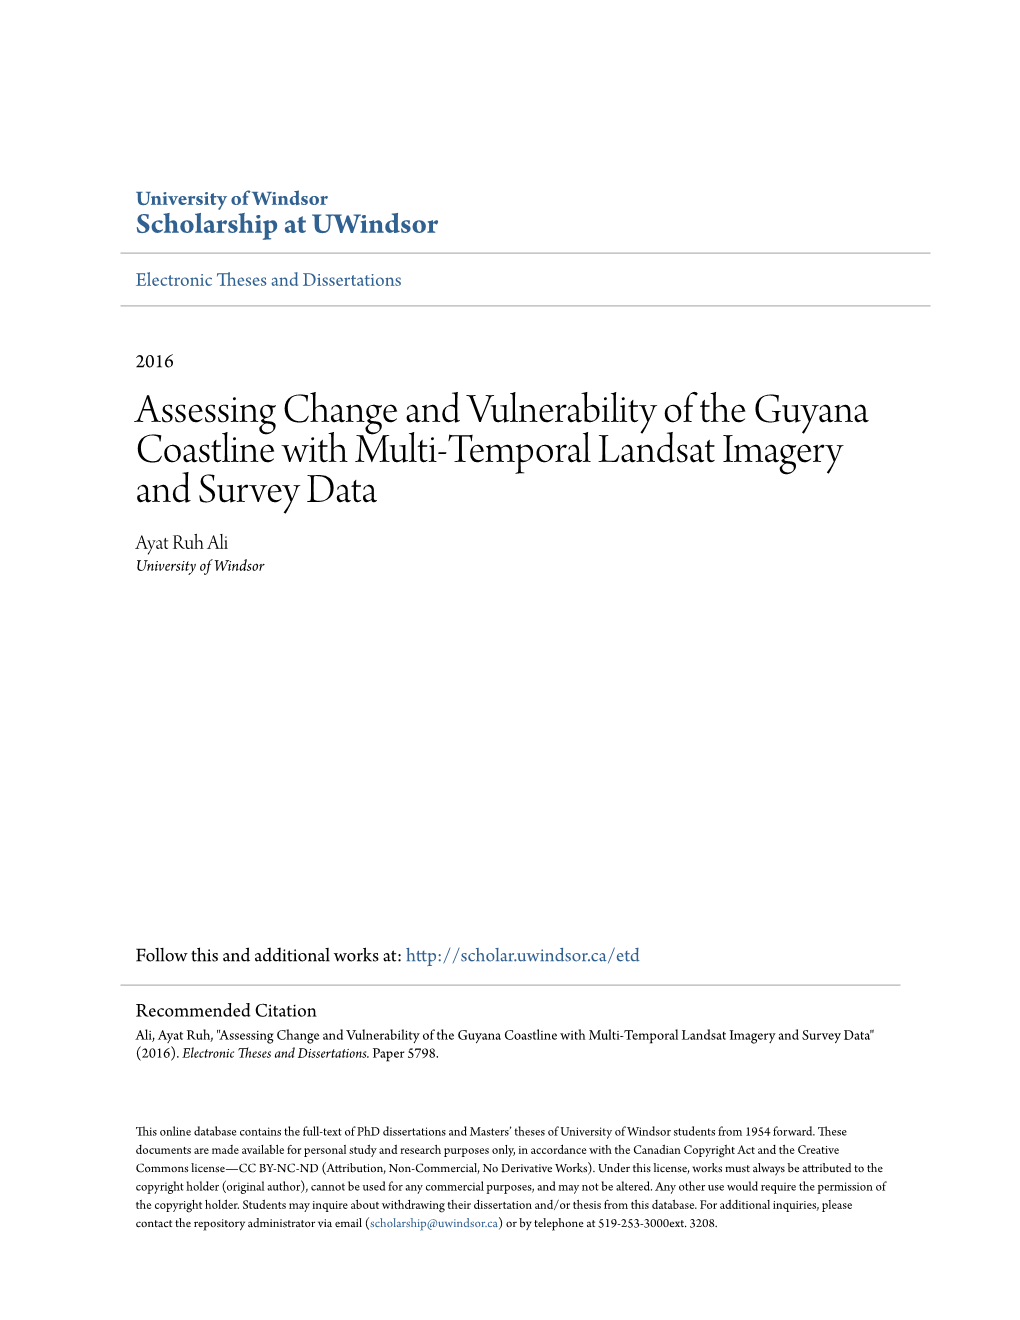 Assessing Change and Vulnerability of the Guyana Coastline with Multi-Temporal Landsat Imagery and Survey Data Ayat Ruh Ali University of Windsor